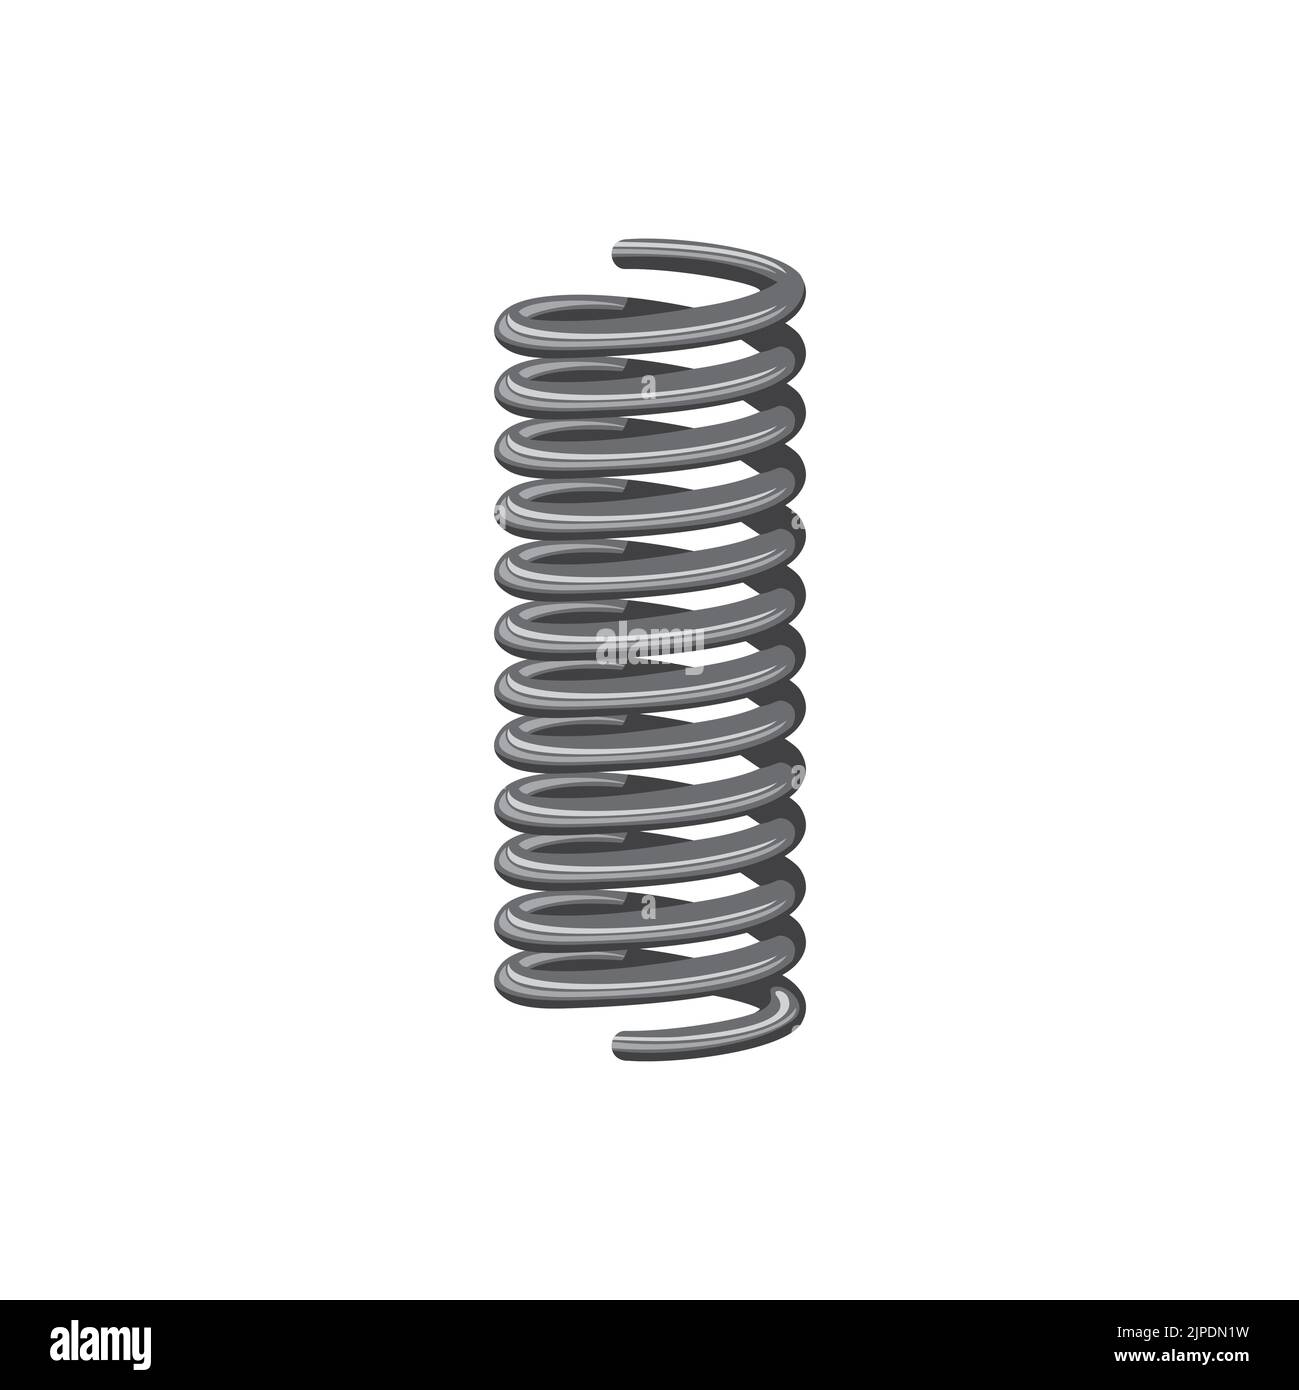 Spring car detail compression and extension elastic object that stores mechanical energy. Vector helical or coil spring designed for tension isolated realistic icon. Tension vehicle spare part Stock Vector